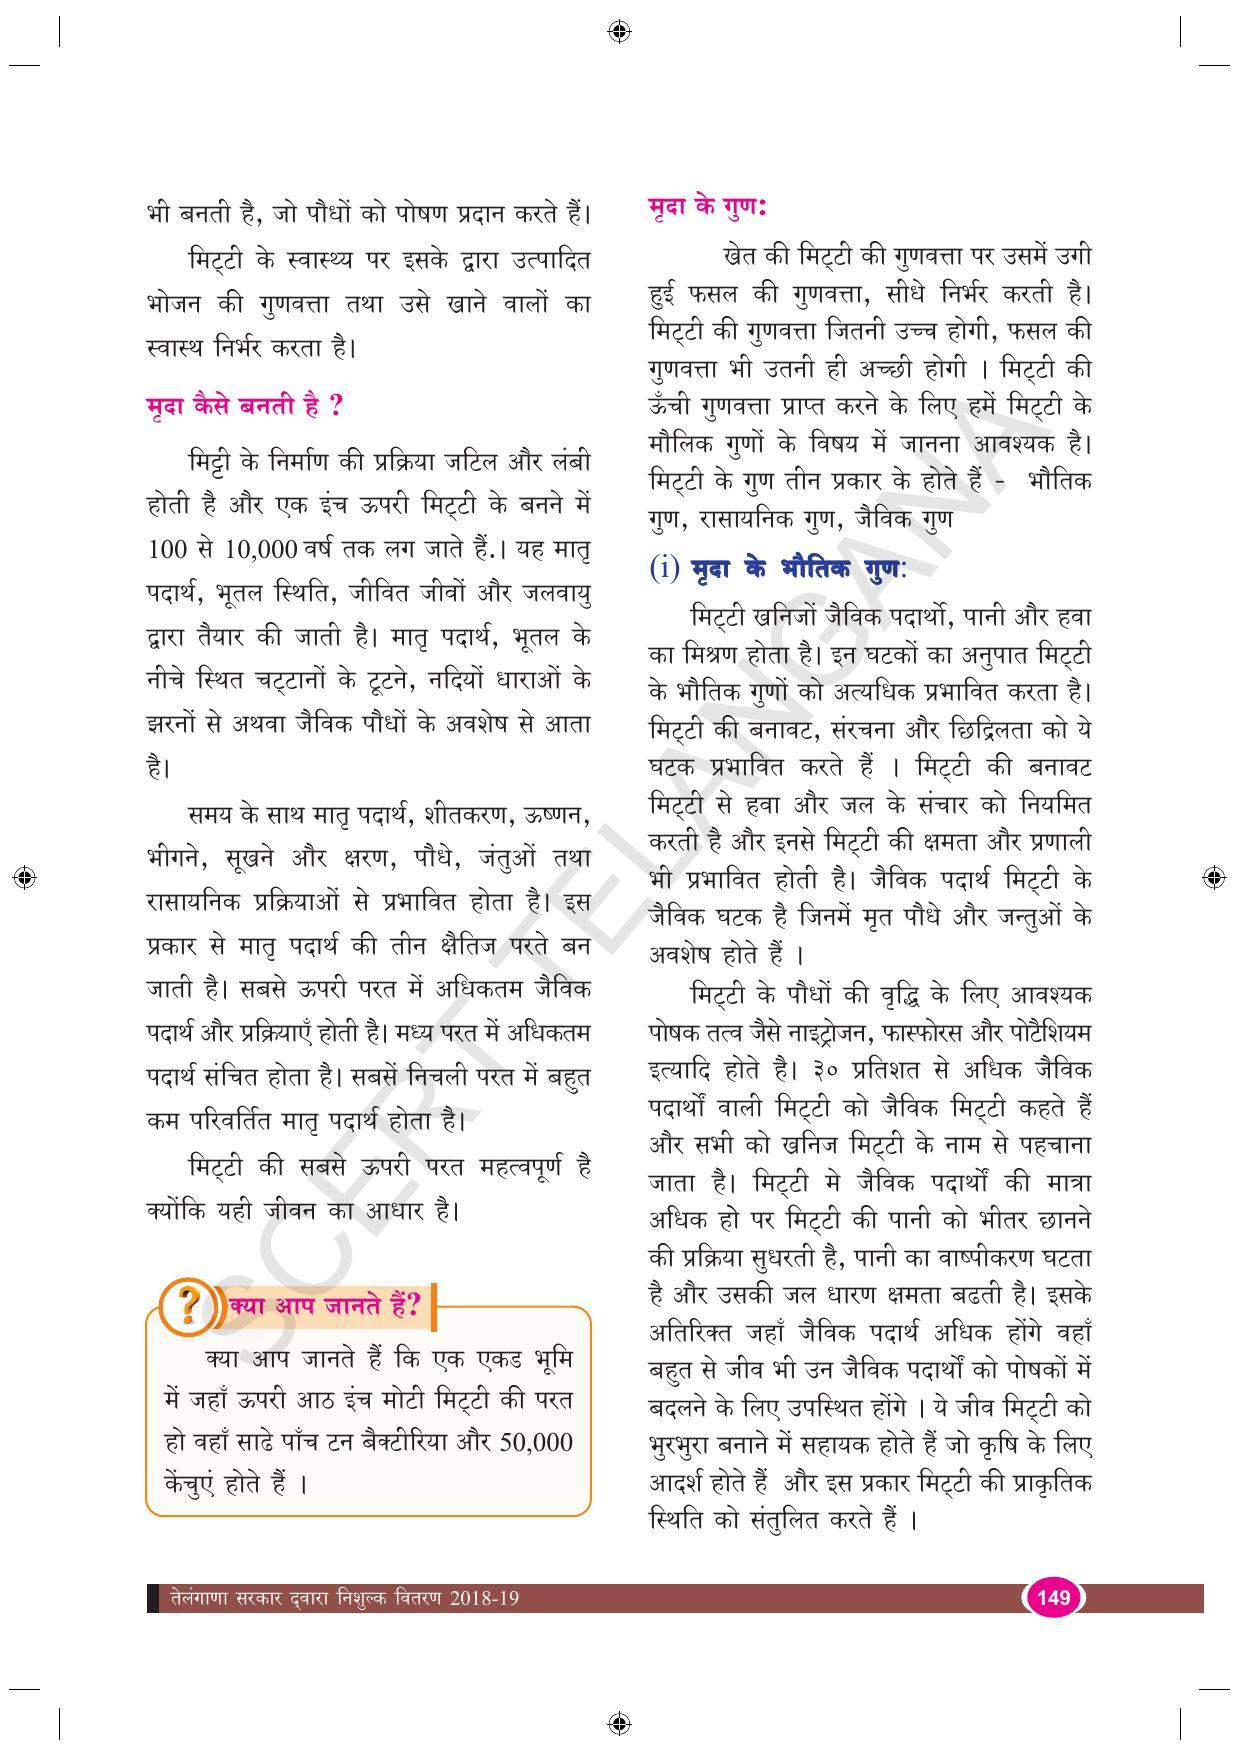 TS SCERT Class 9 Biological Science (Hindi Medium) Text Book - Page 161